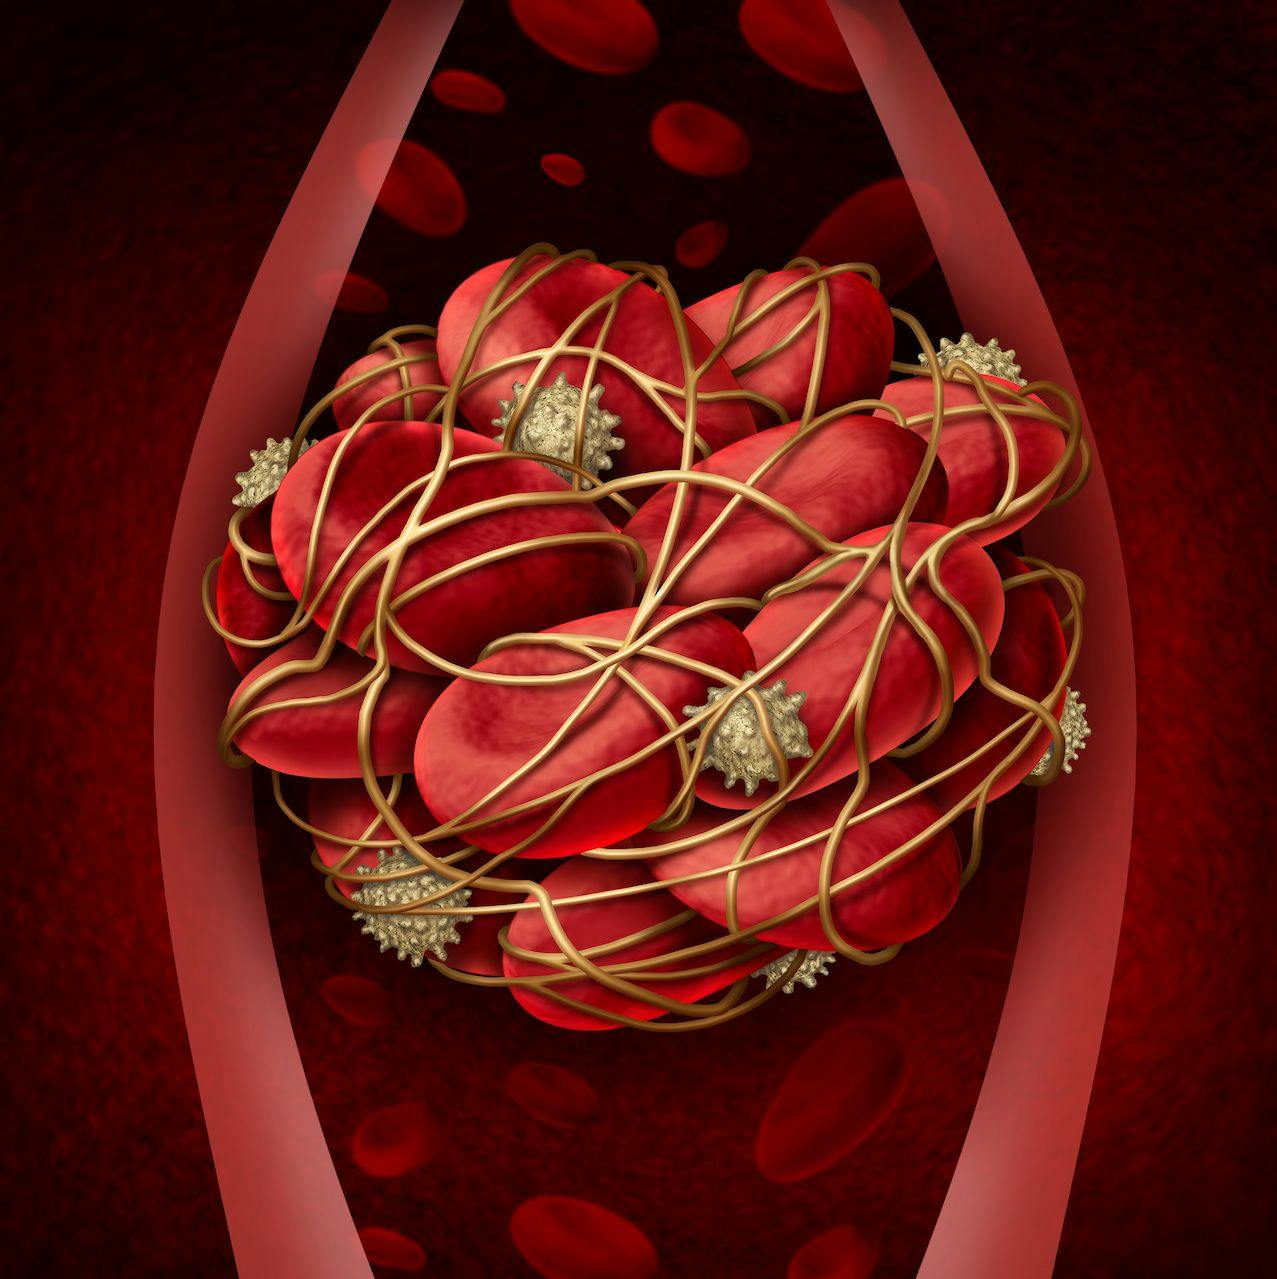 Increased WBC Count Linked With Thrombotic Events in Patients With PV